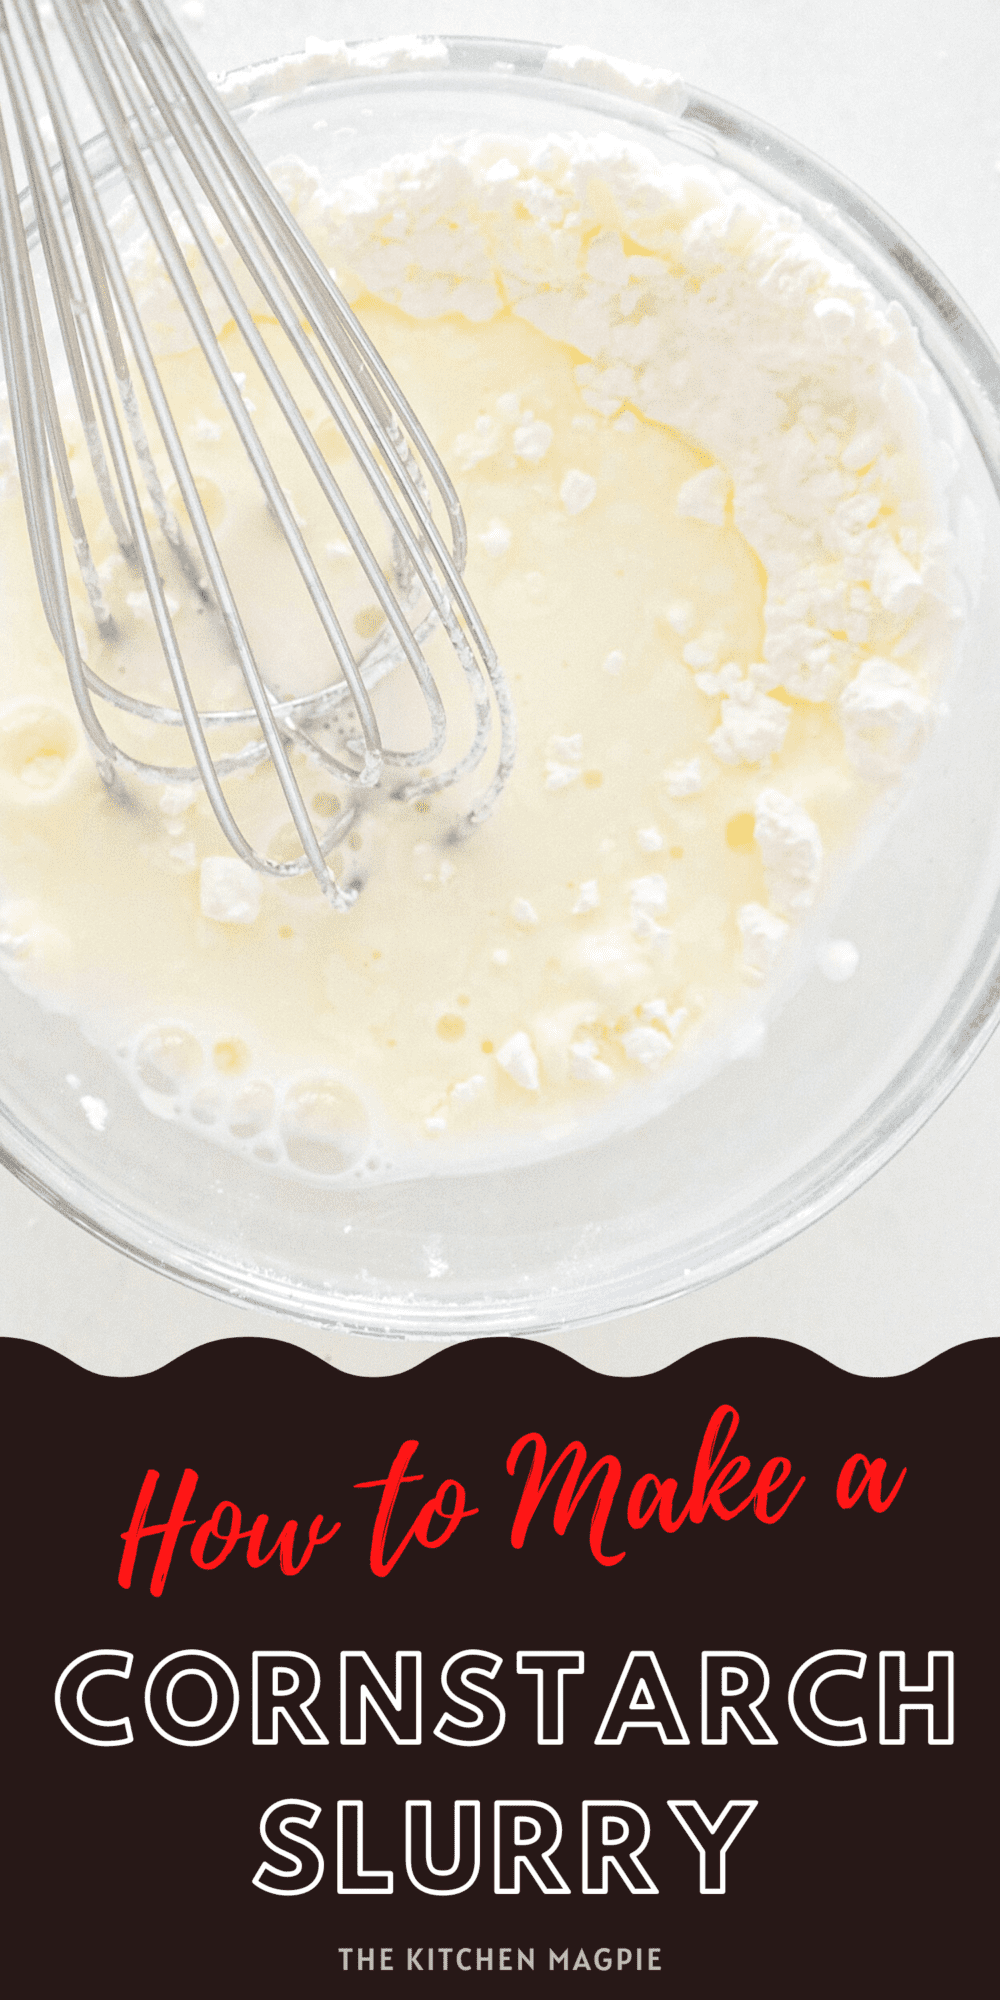 How to make a cornstarch slurry to use in dishes to thicken sauces or broths.